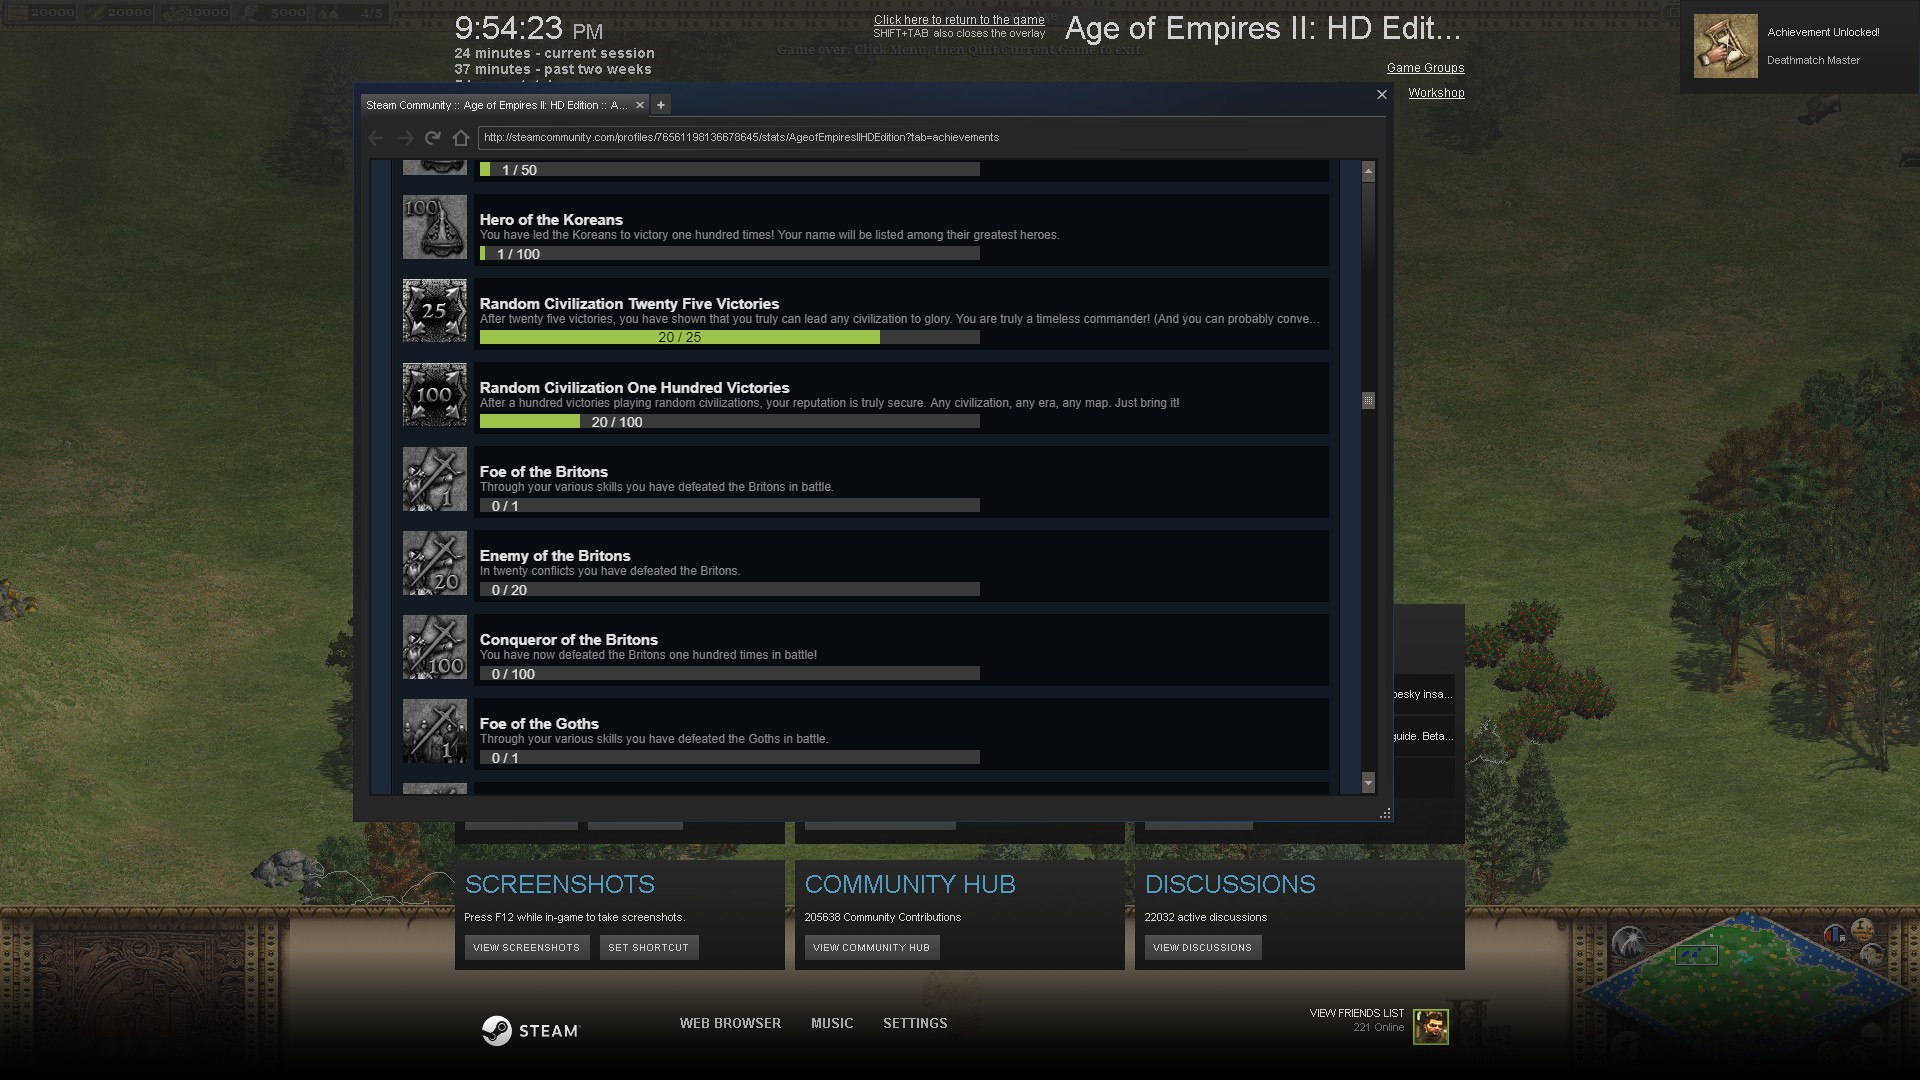 age of empires 3 not working on windows 10